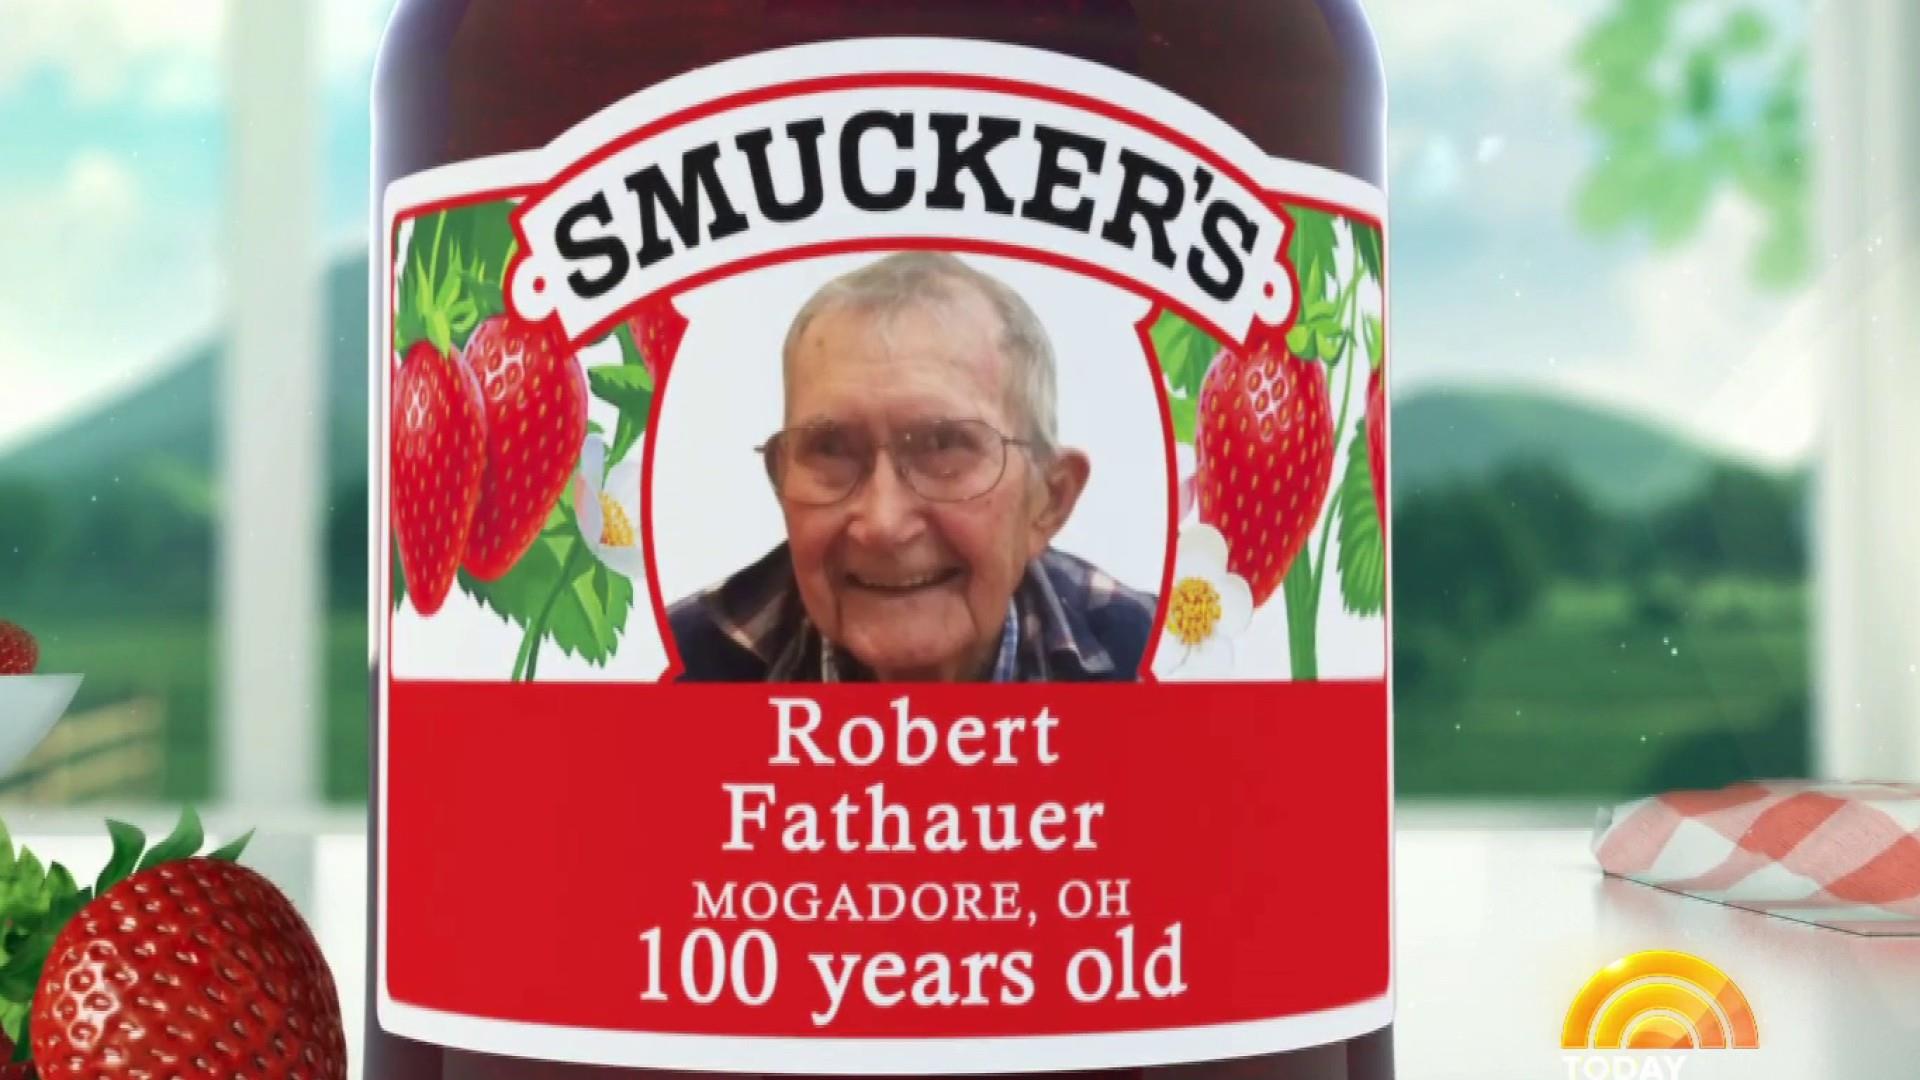 31 Smuckers 100th Birthday Label Labels Database 2020